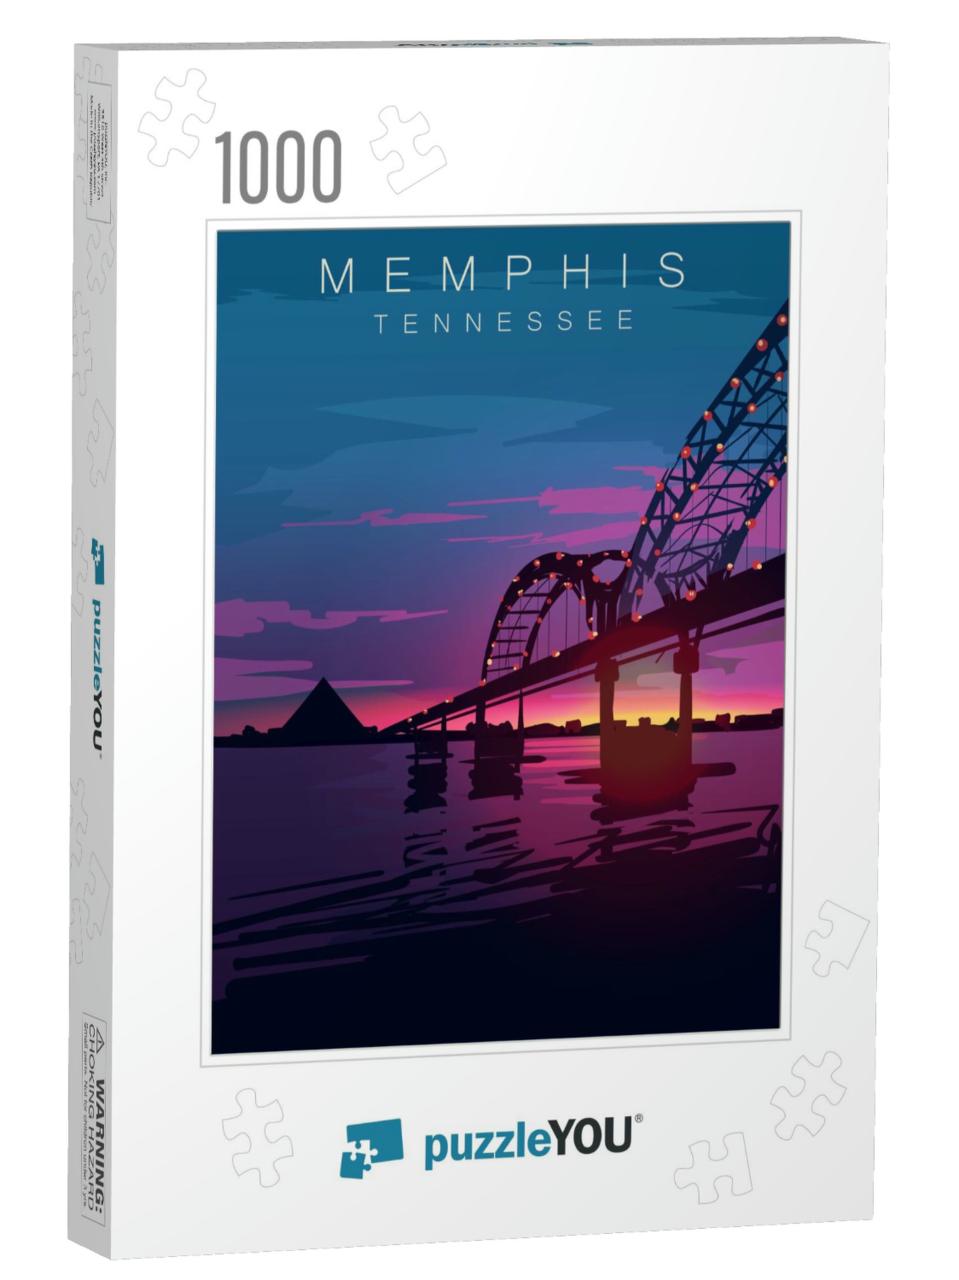 Memphis Modern Vector Poster. Memphis, Tennessee Landscap... Jigsaw Puzzle with 1000 pieces